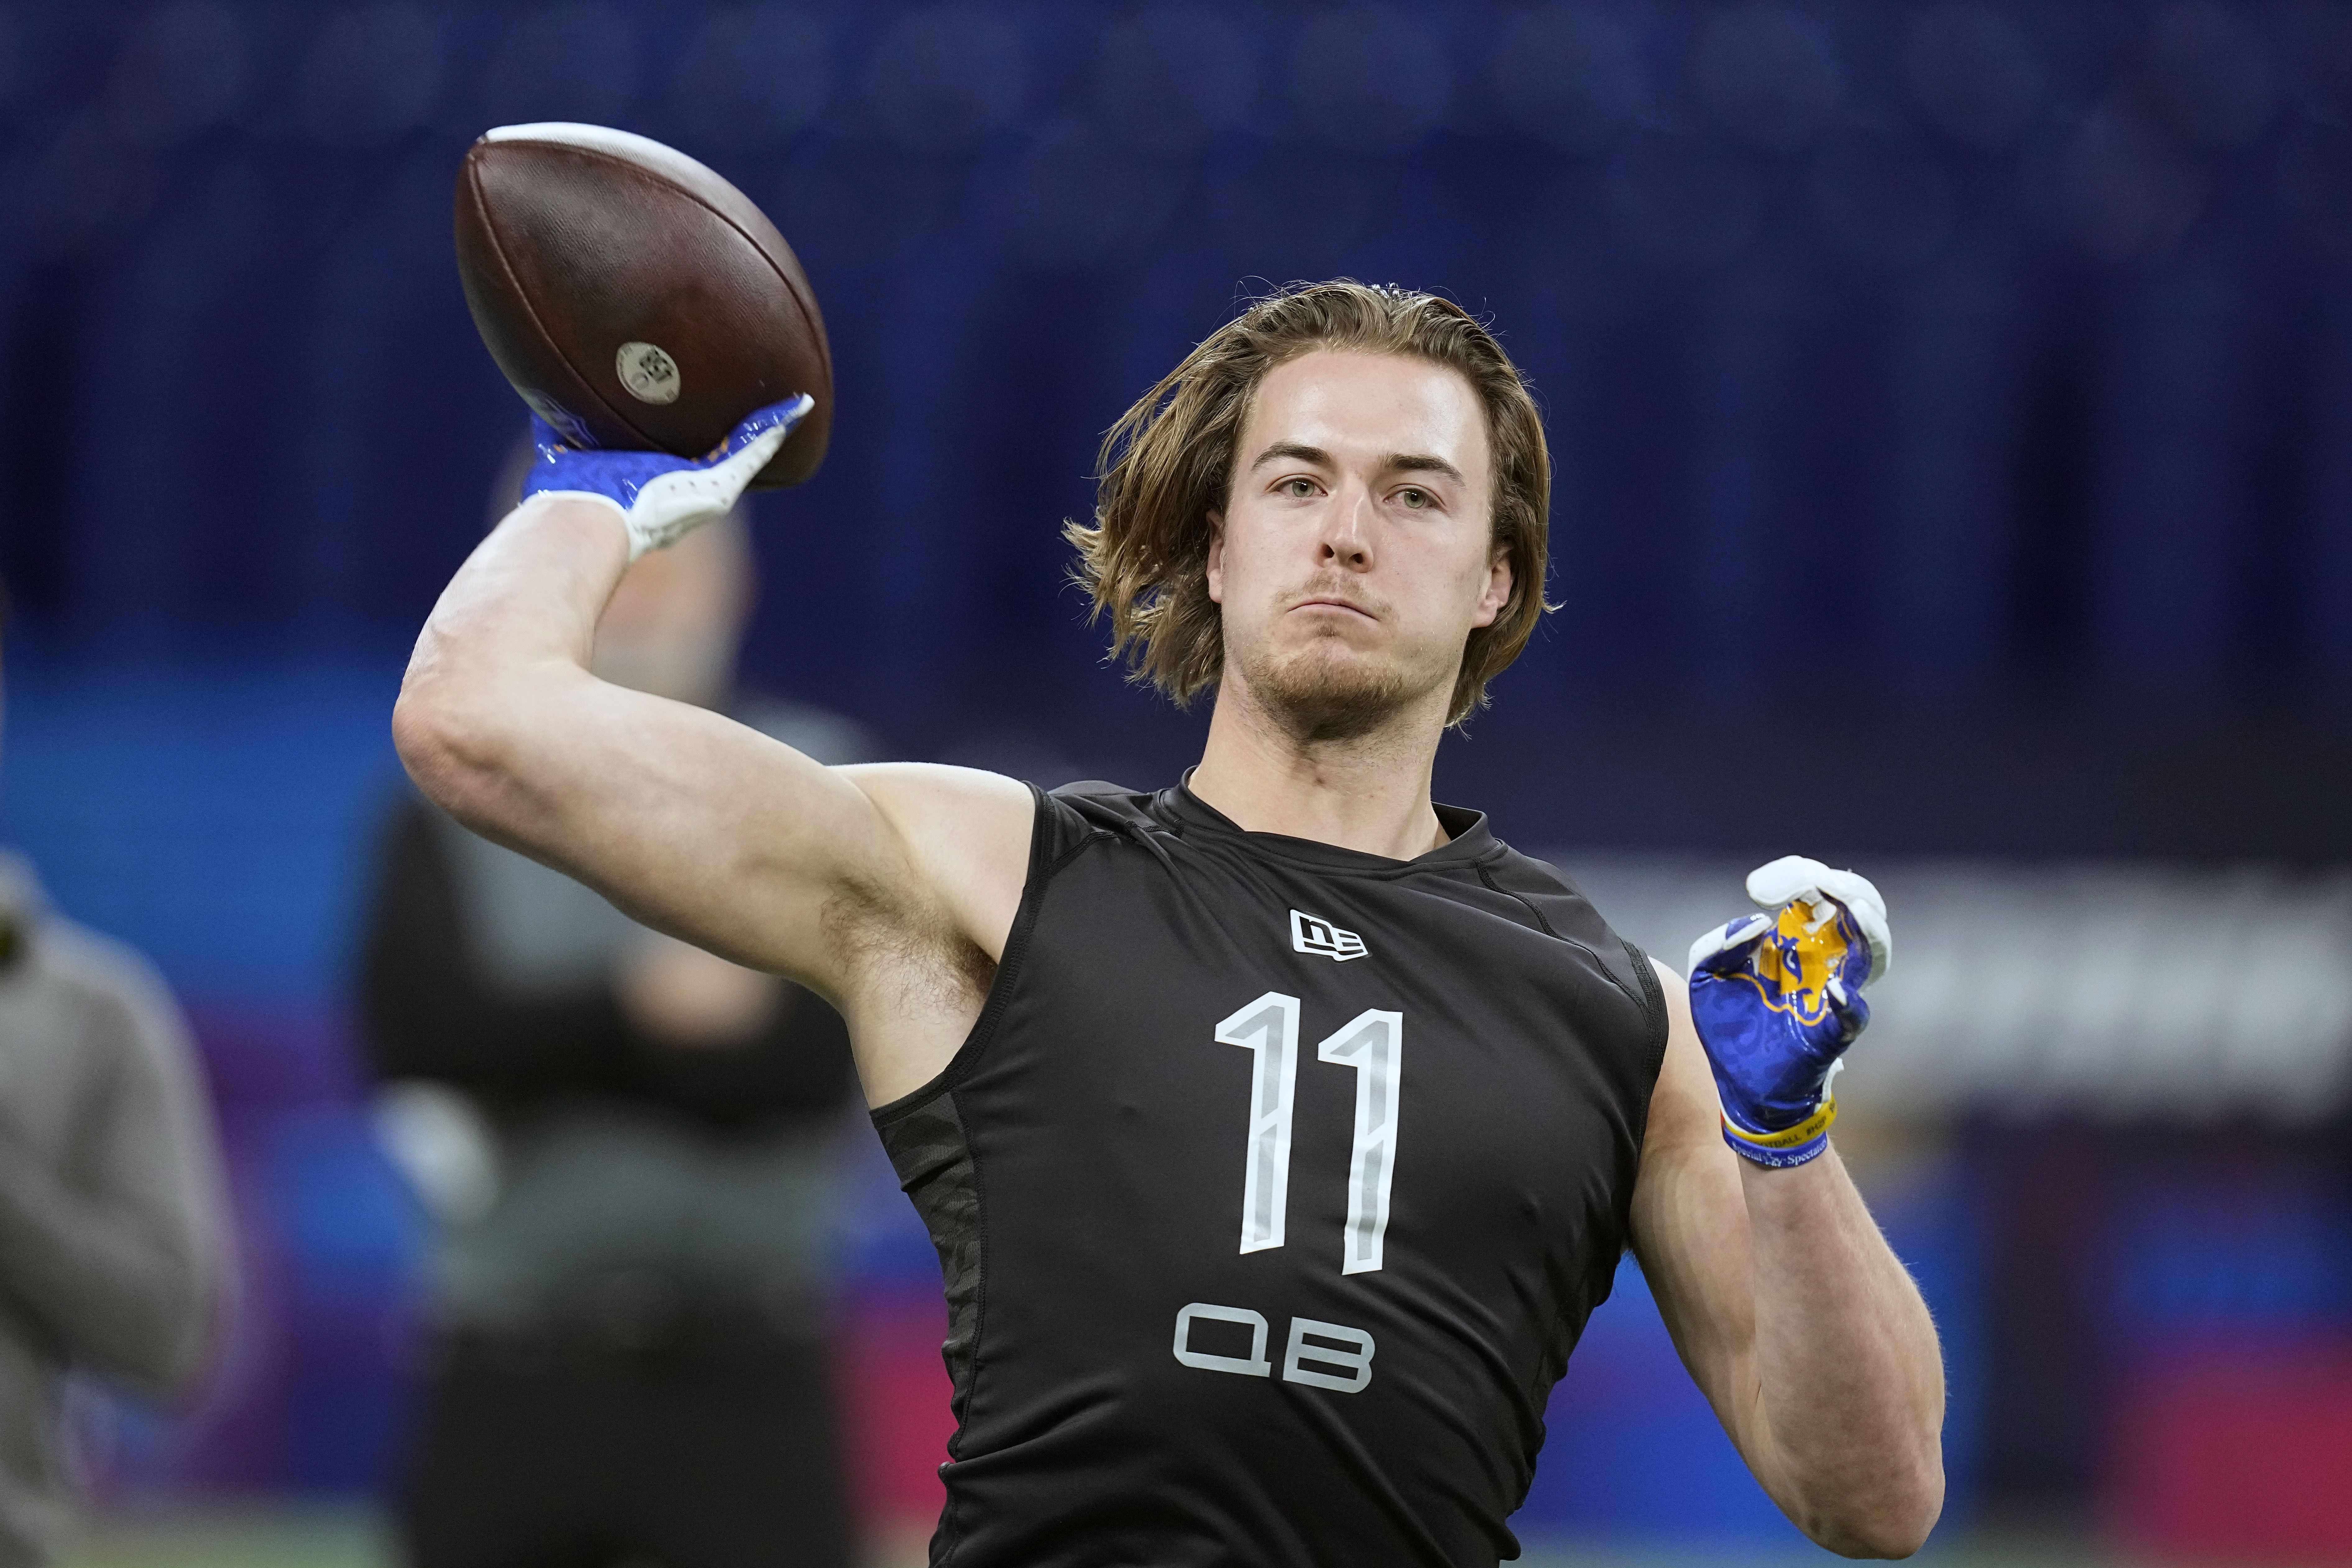 2022 NFL Scouting Combine: Dates, times, location, how to watch and more